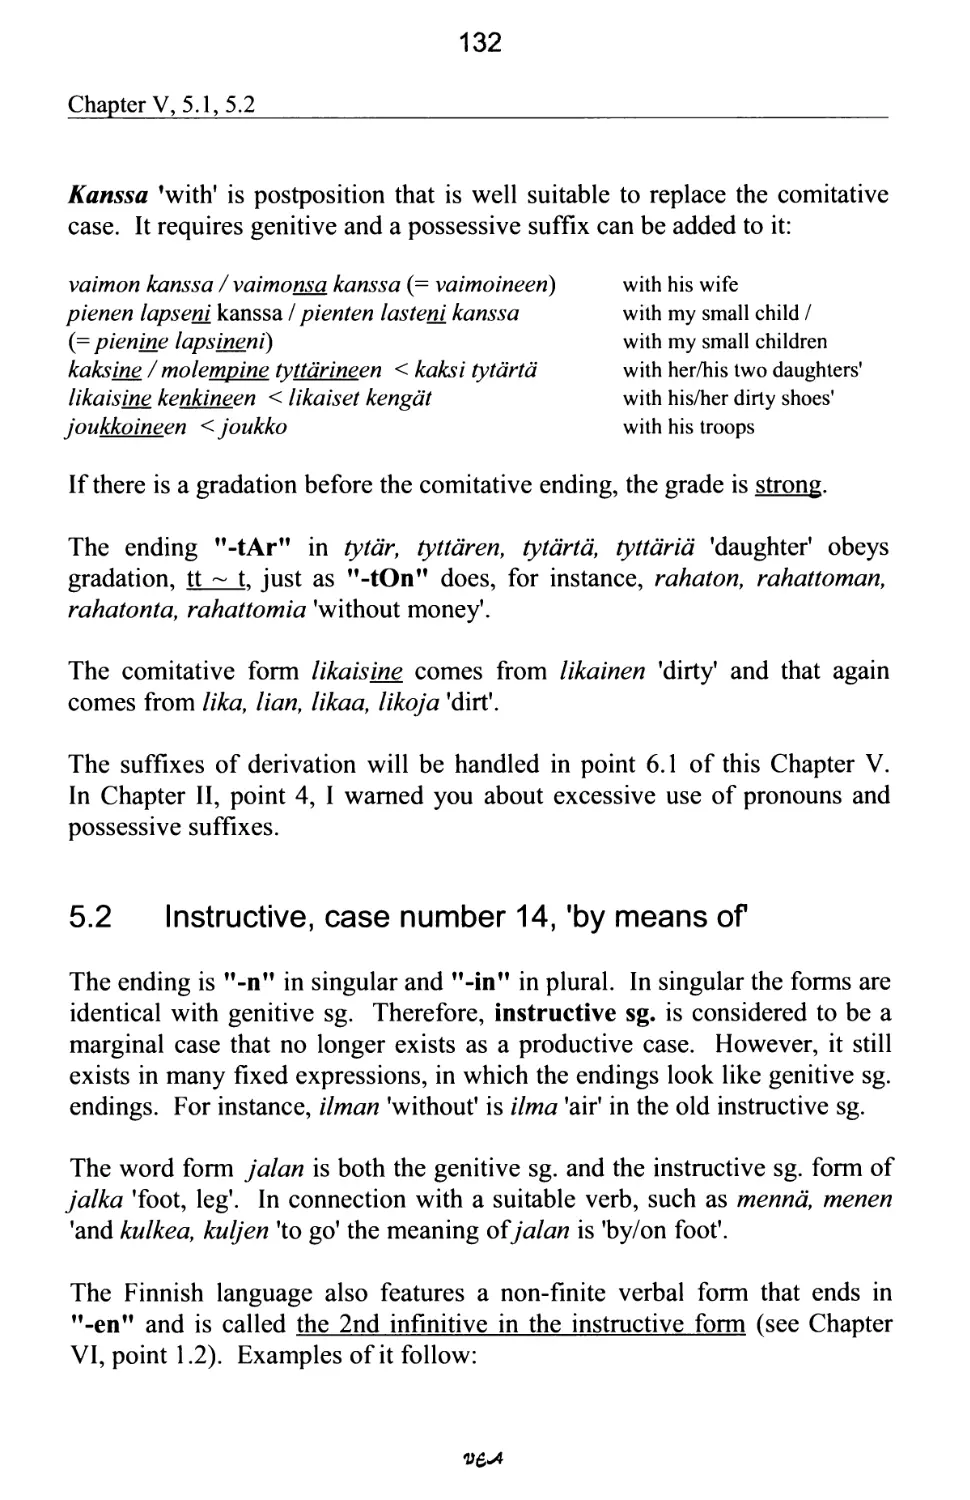 5.2 Instructive, Case number 14,'by means of